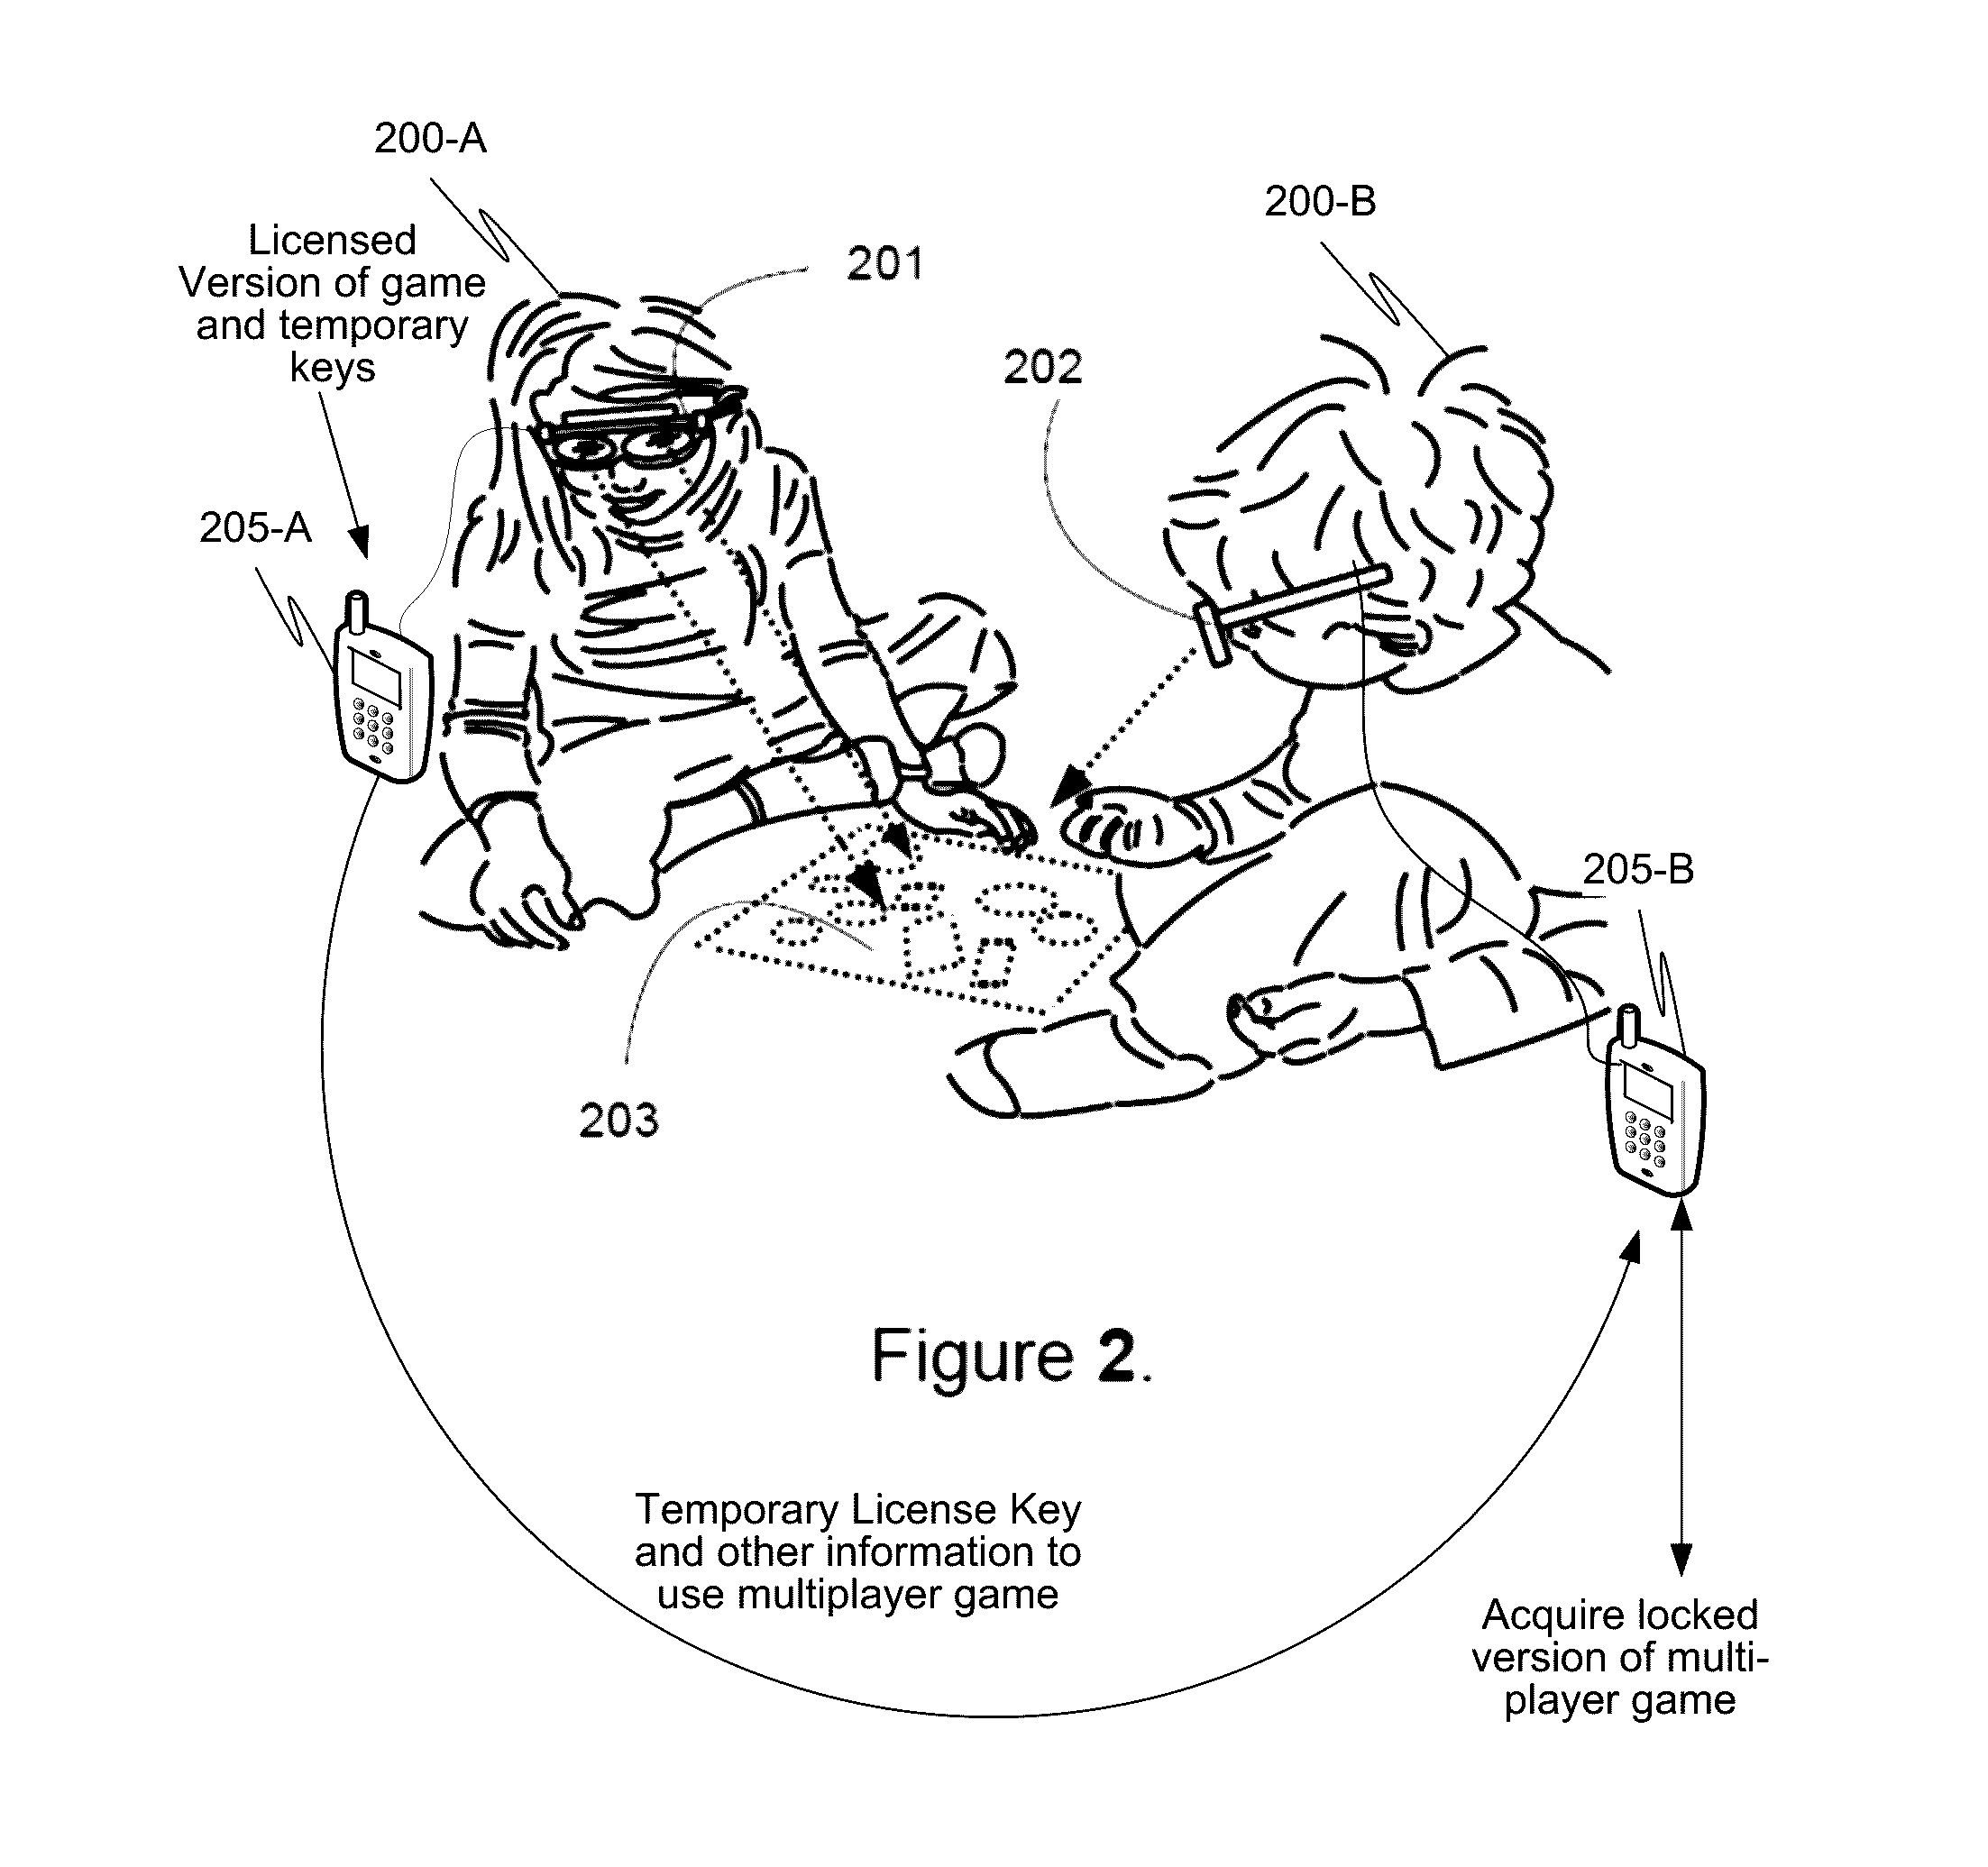 Method of co-located software object sharing for multi-player augmented reality games